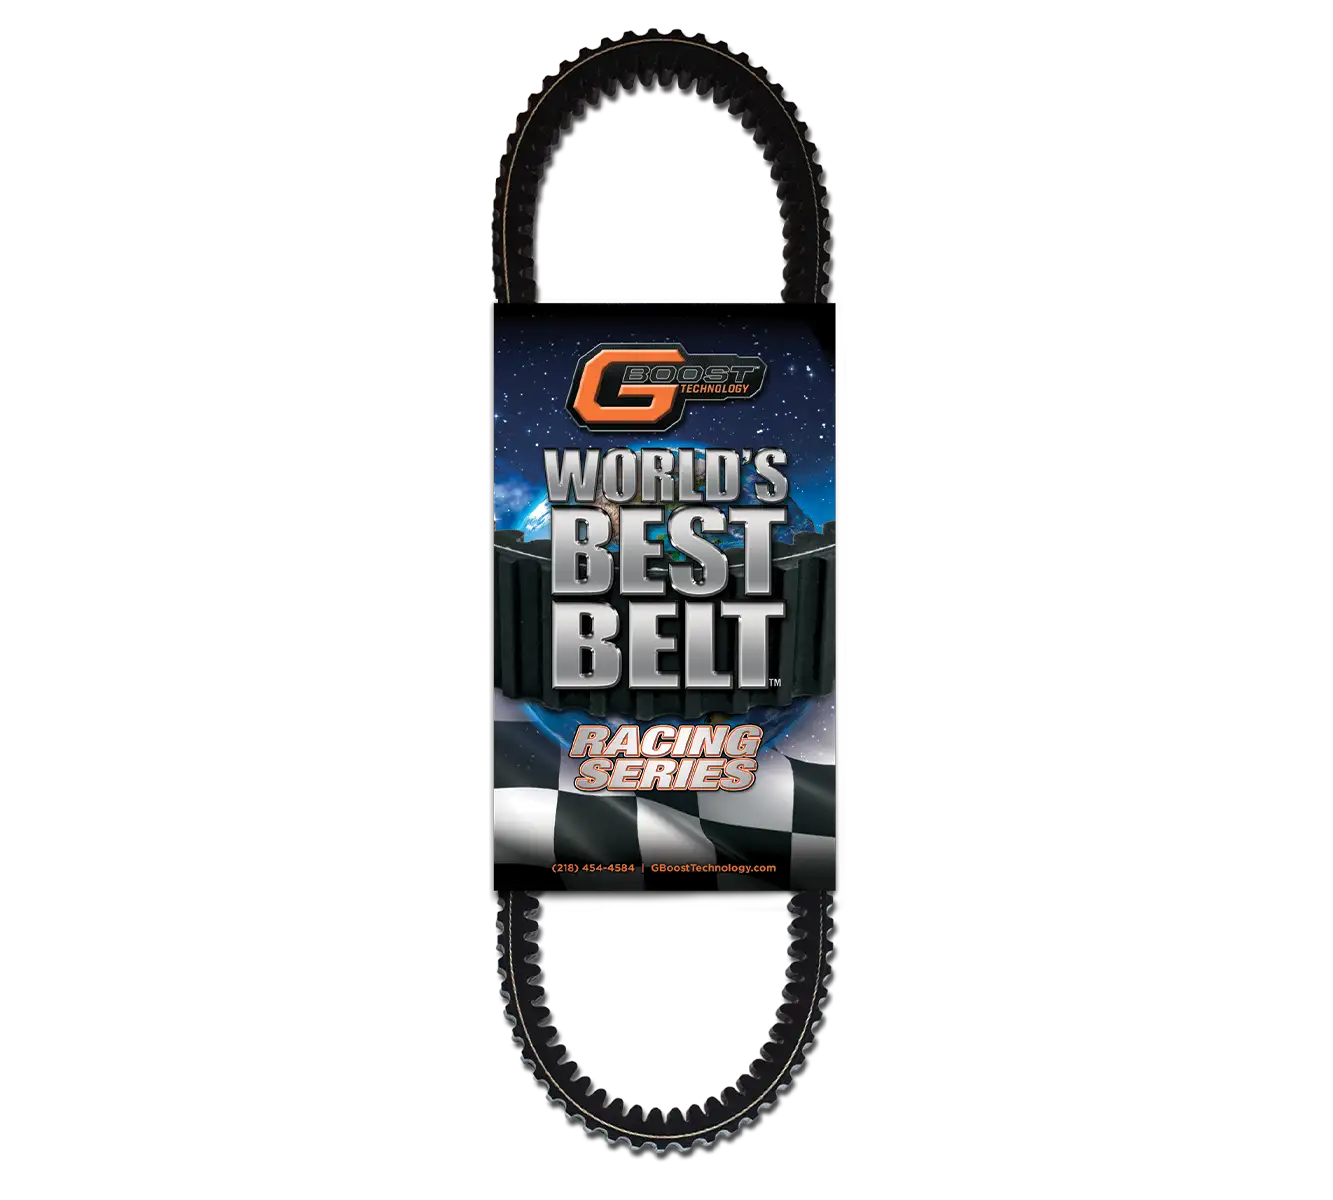 GBoost World's Best Belt RACE SERIAS for Can Am in Europe Lizardwarehouse